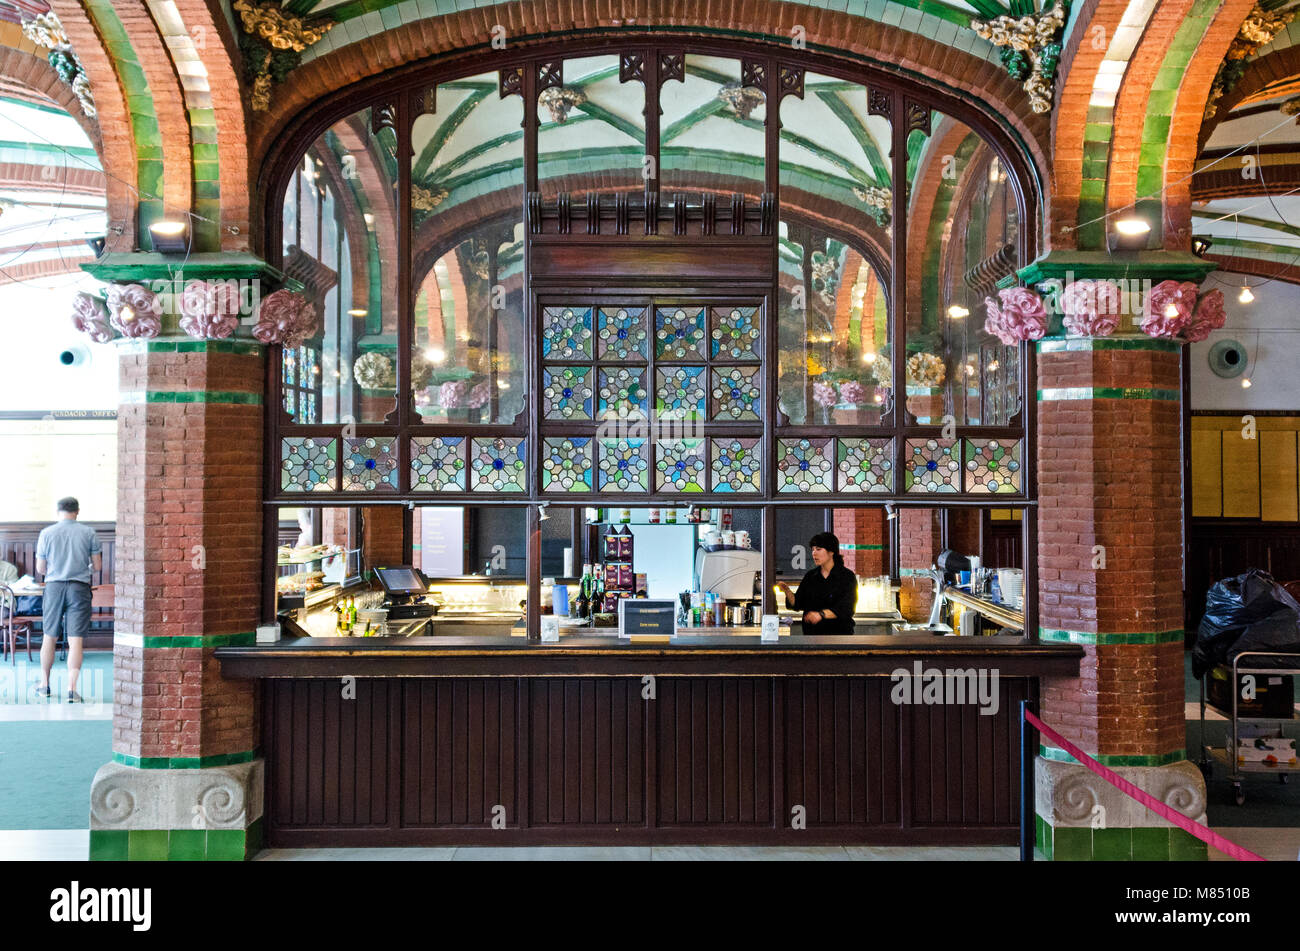 The Cafe Foyer in the Palau de la Música Catalana, with stained glass by Antoni Rigalt, Barcelona, Spain Stock Photo